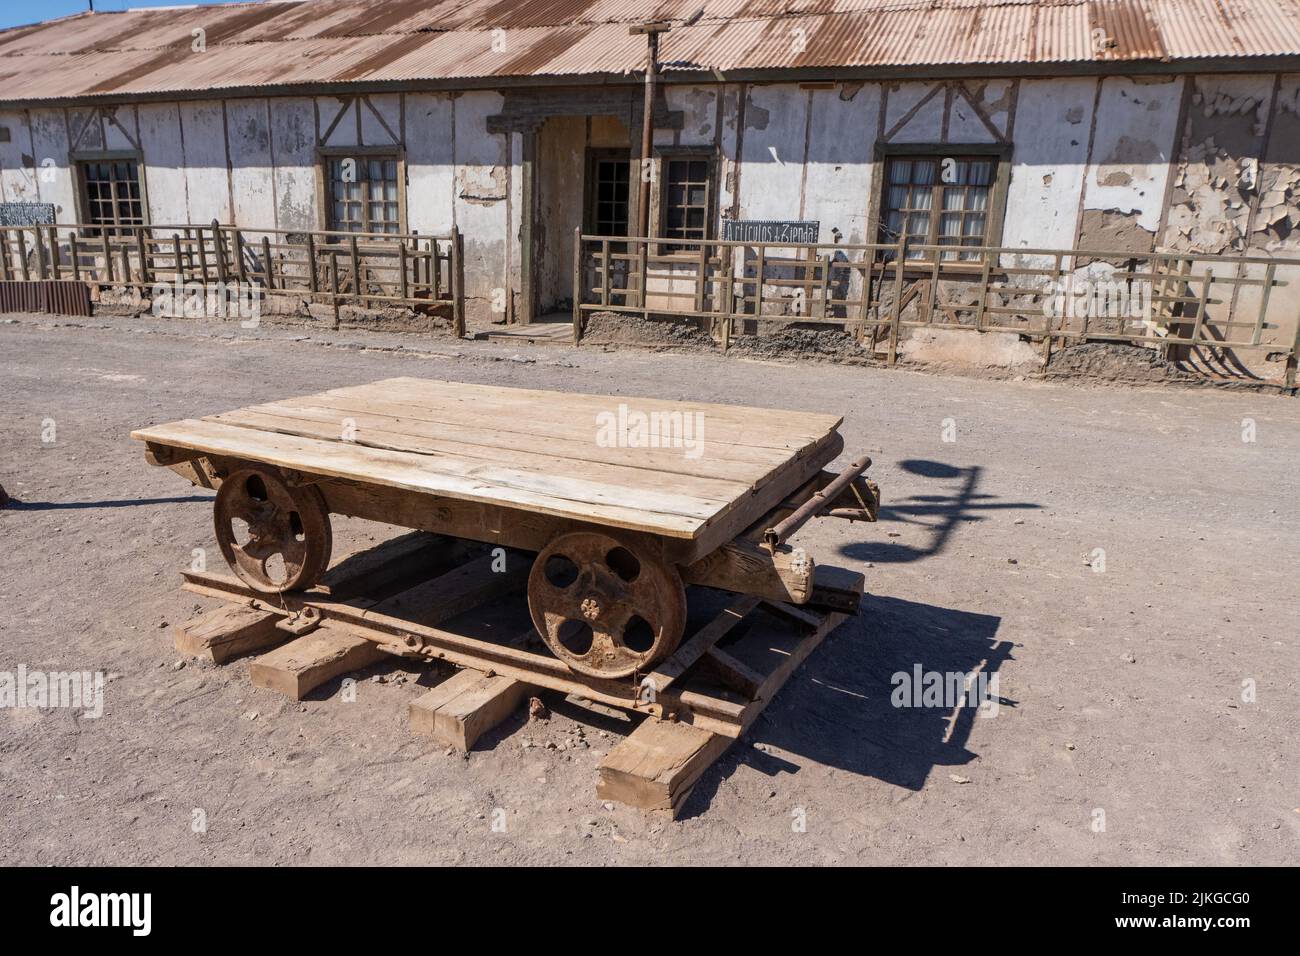 Outdoor museum display of a rail cart used in the saltpeter works in Humberstone, Chile.  Employee housing behind. Stock Photo